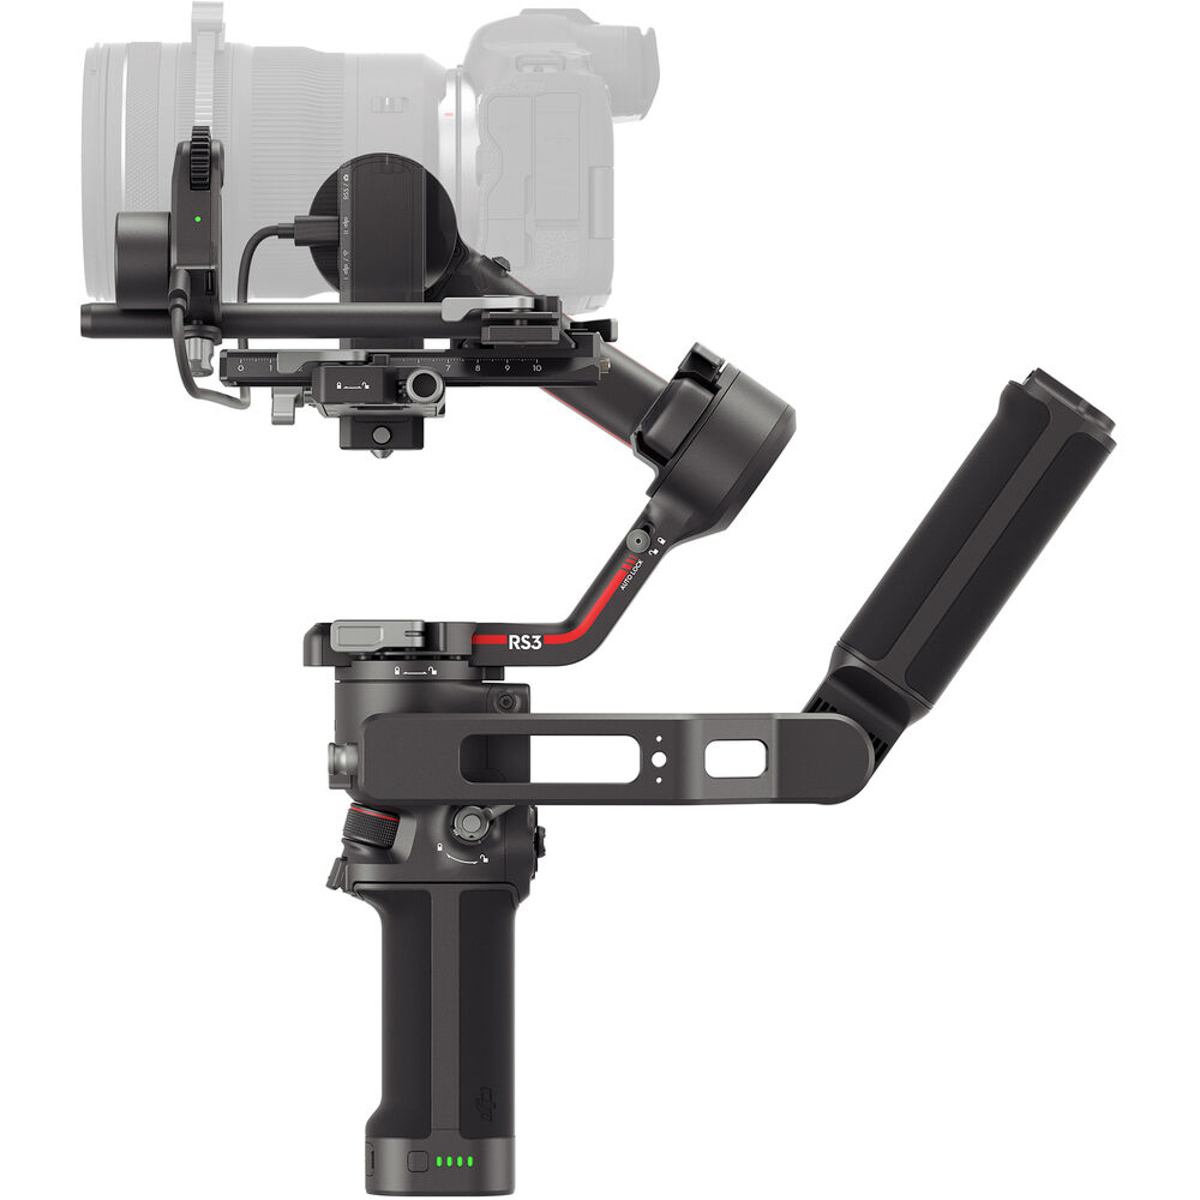 7 Gimbal Moves Using the New DJI RS3 Gimbal Stabilizer